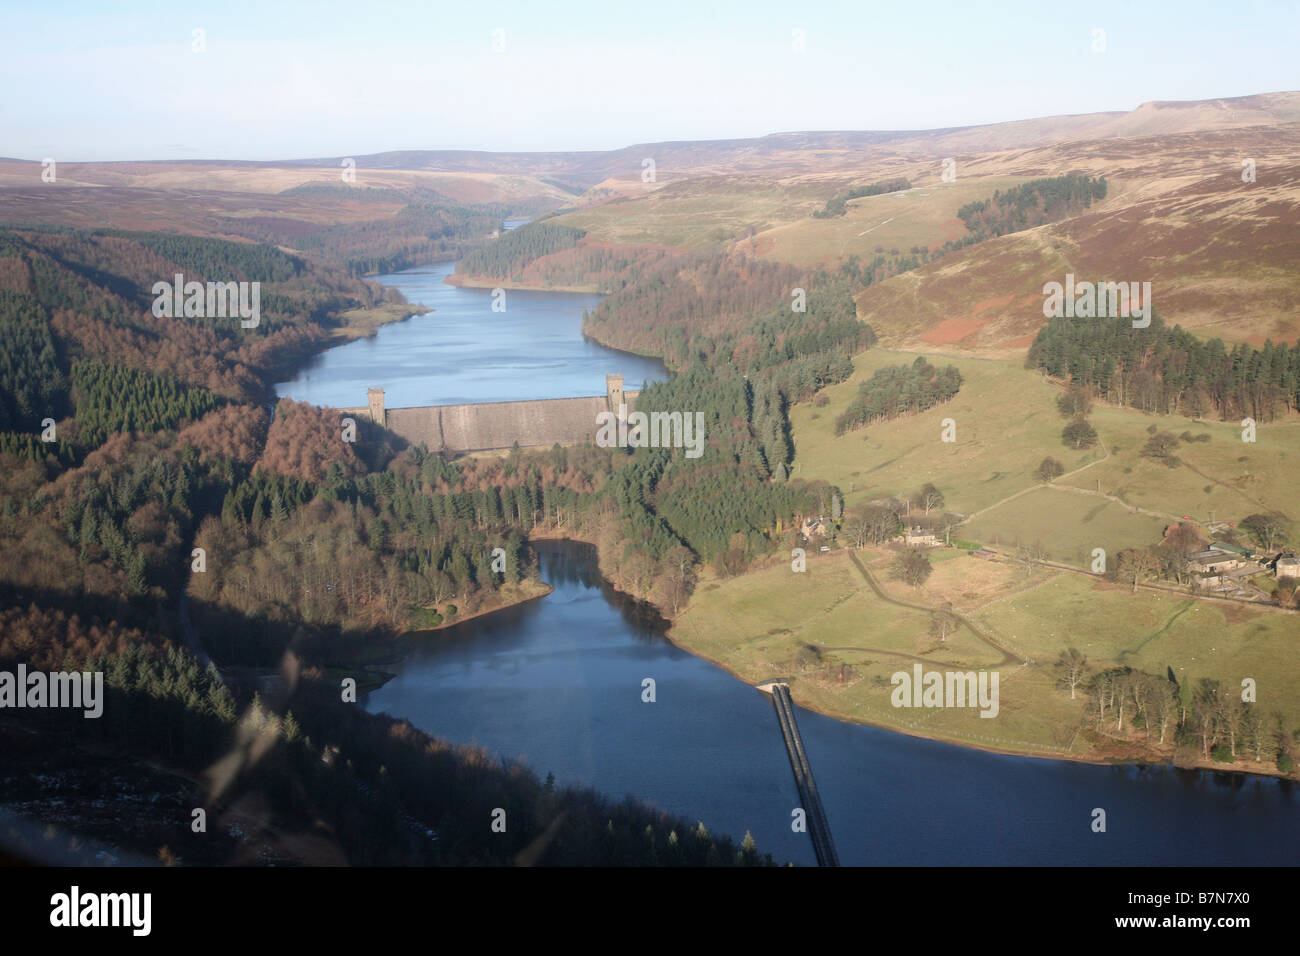 An aerial view of Derwent Dam showing the Ladybower Reservoir in the foreground and the Derwent Reservoir in the background Stock Photo